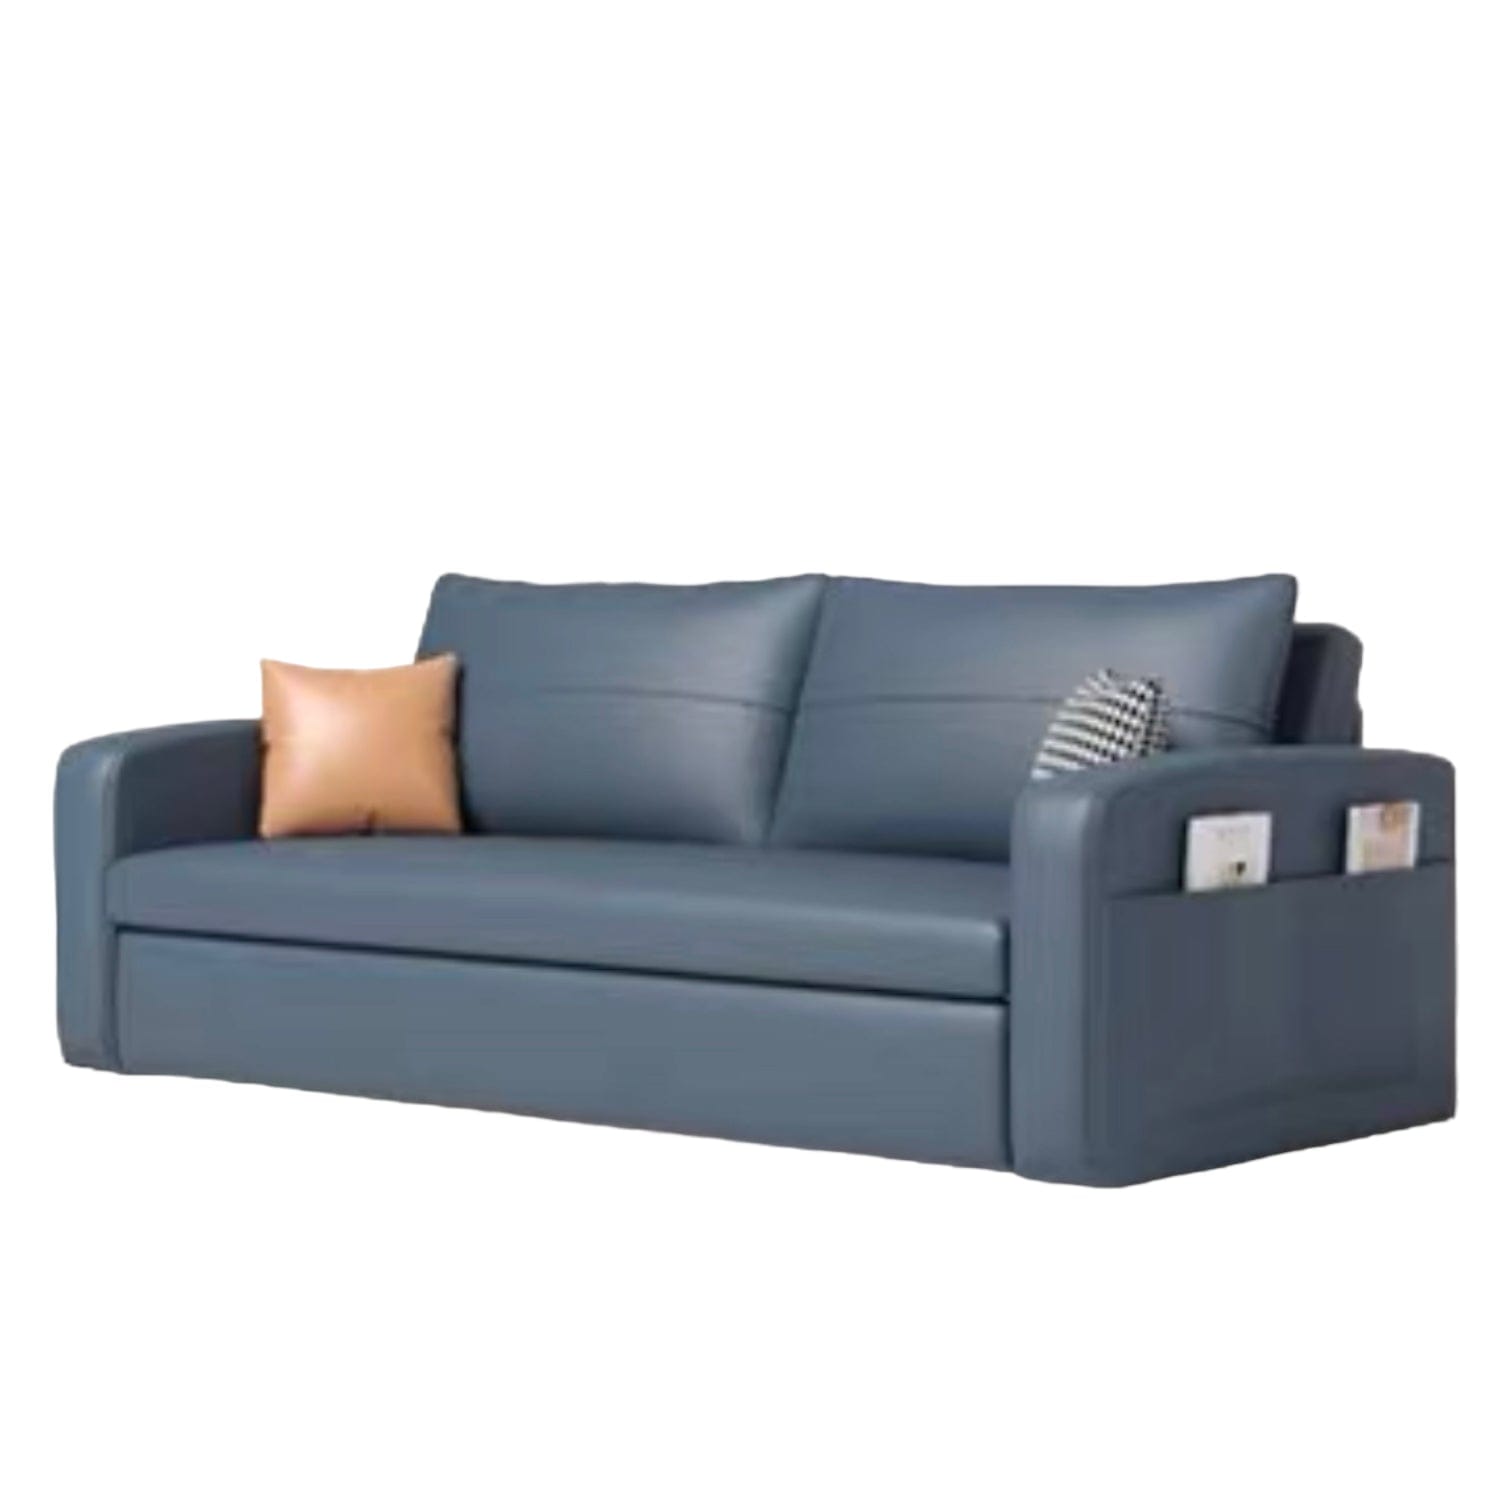 Home Atelier Angie Storage Sofa Bed